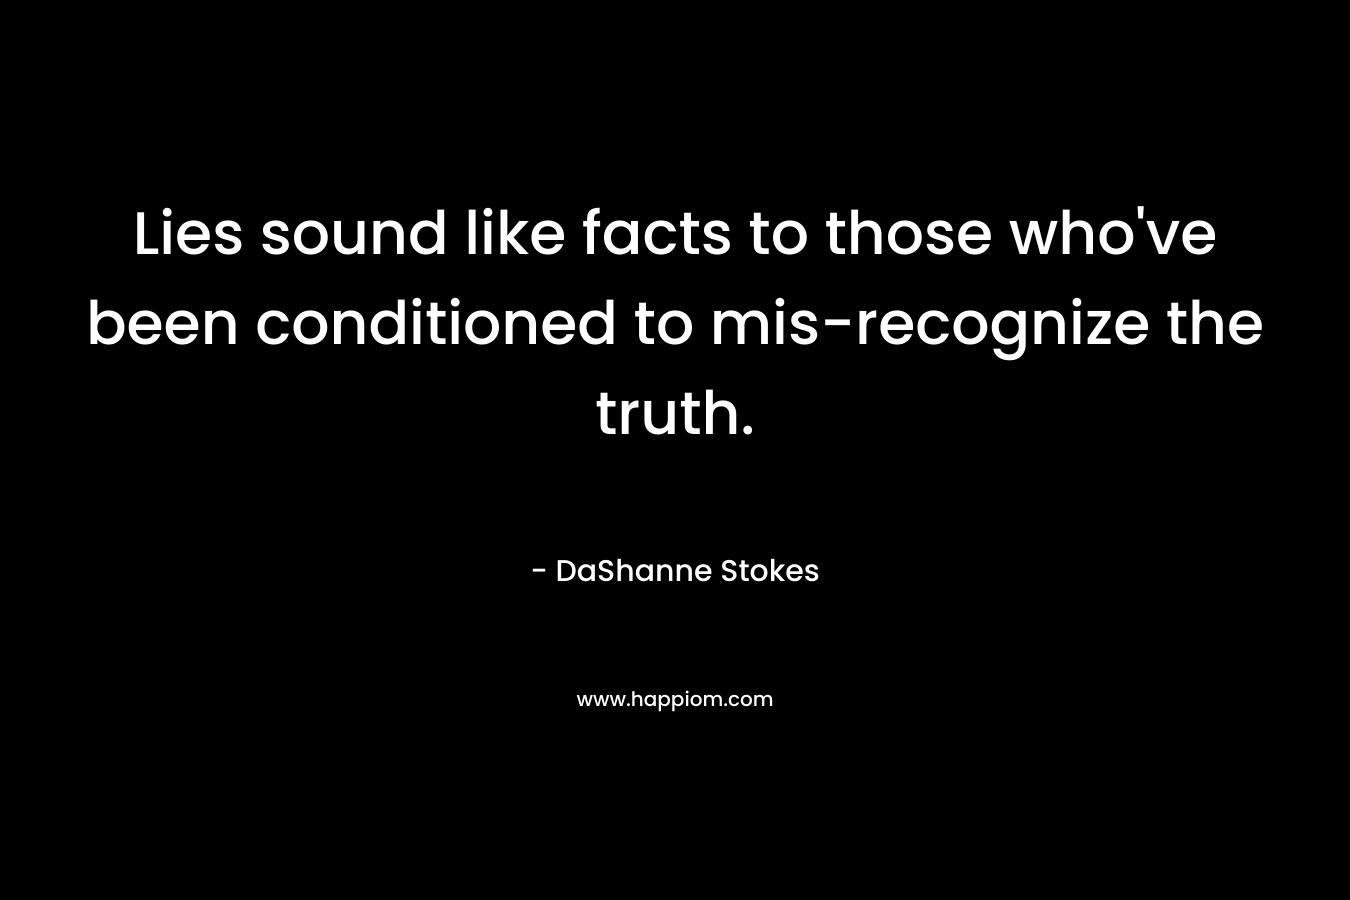 Lies sound like facts to those who've been conditioned to mis-recognize the truth.